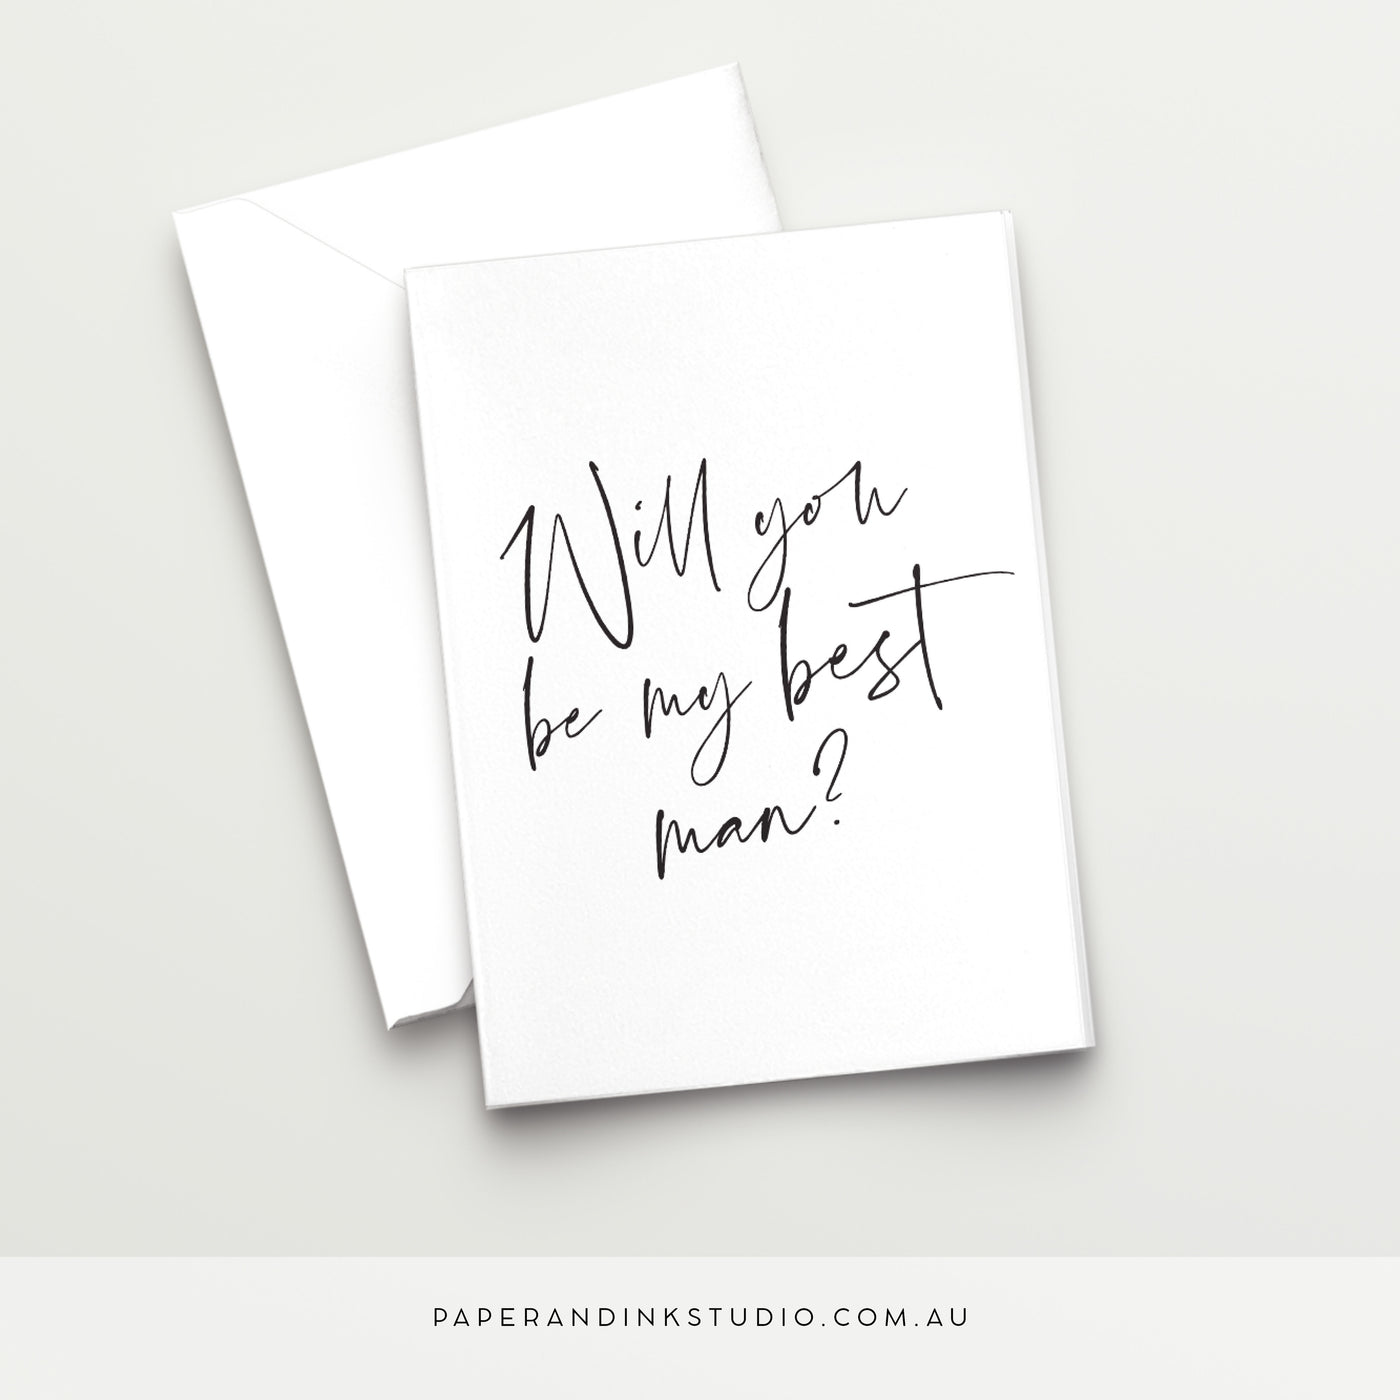 A white folded wedding or best man card in a design called Thorne with black writing that says will you be my best man, asking your friend to be your best man at your wedding.